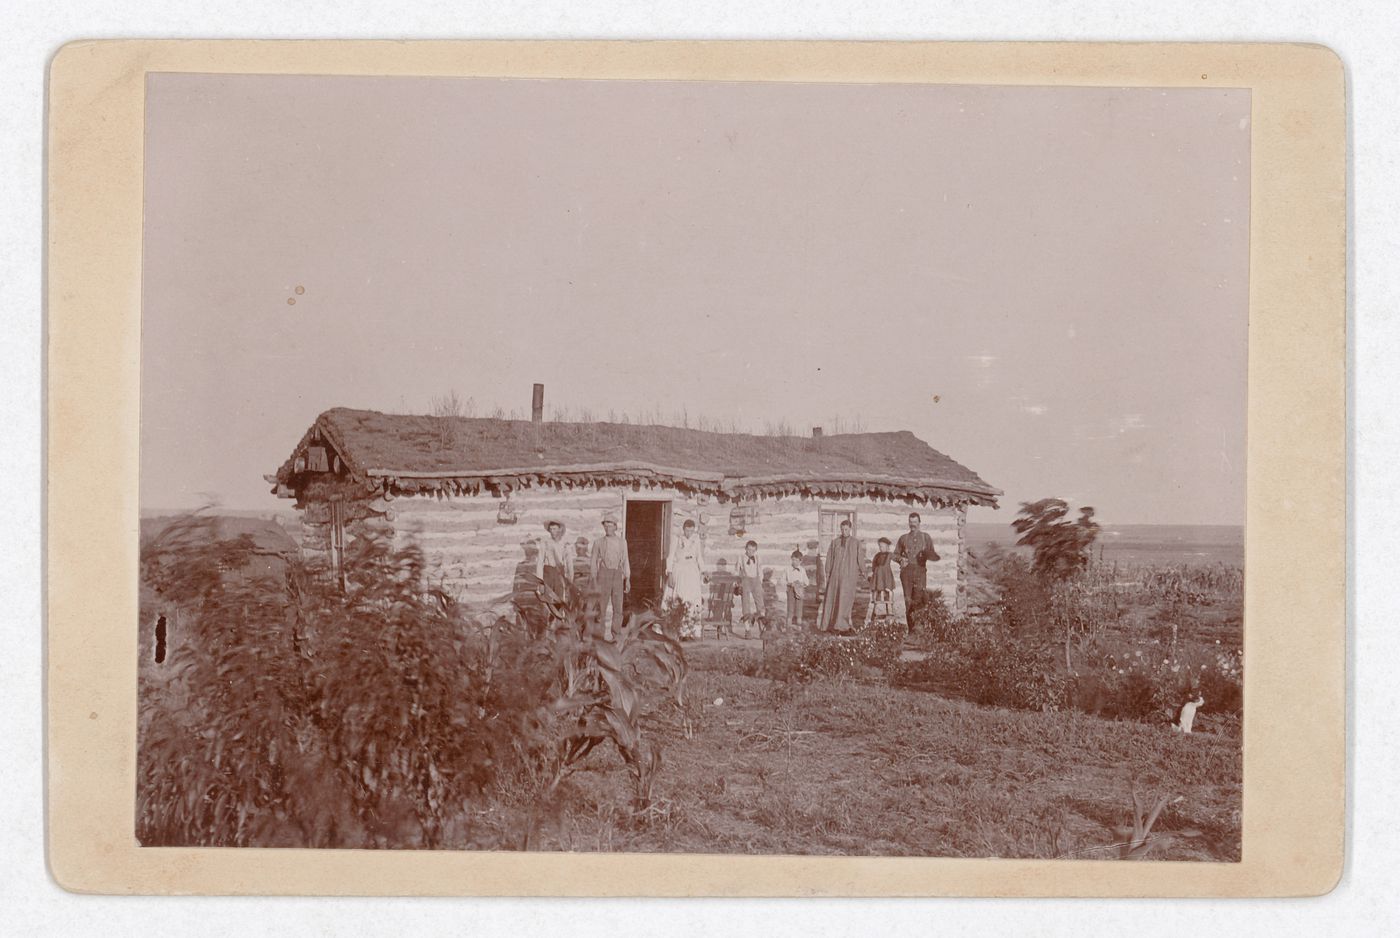 Group portrait of five adults and three children, possibly a family, standing in front of log cabin with sod roof and garden, probably Kansas, United States